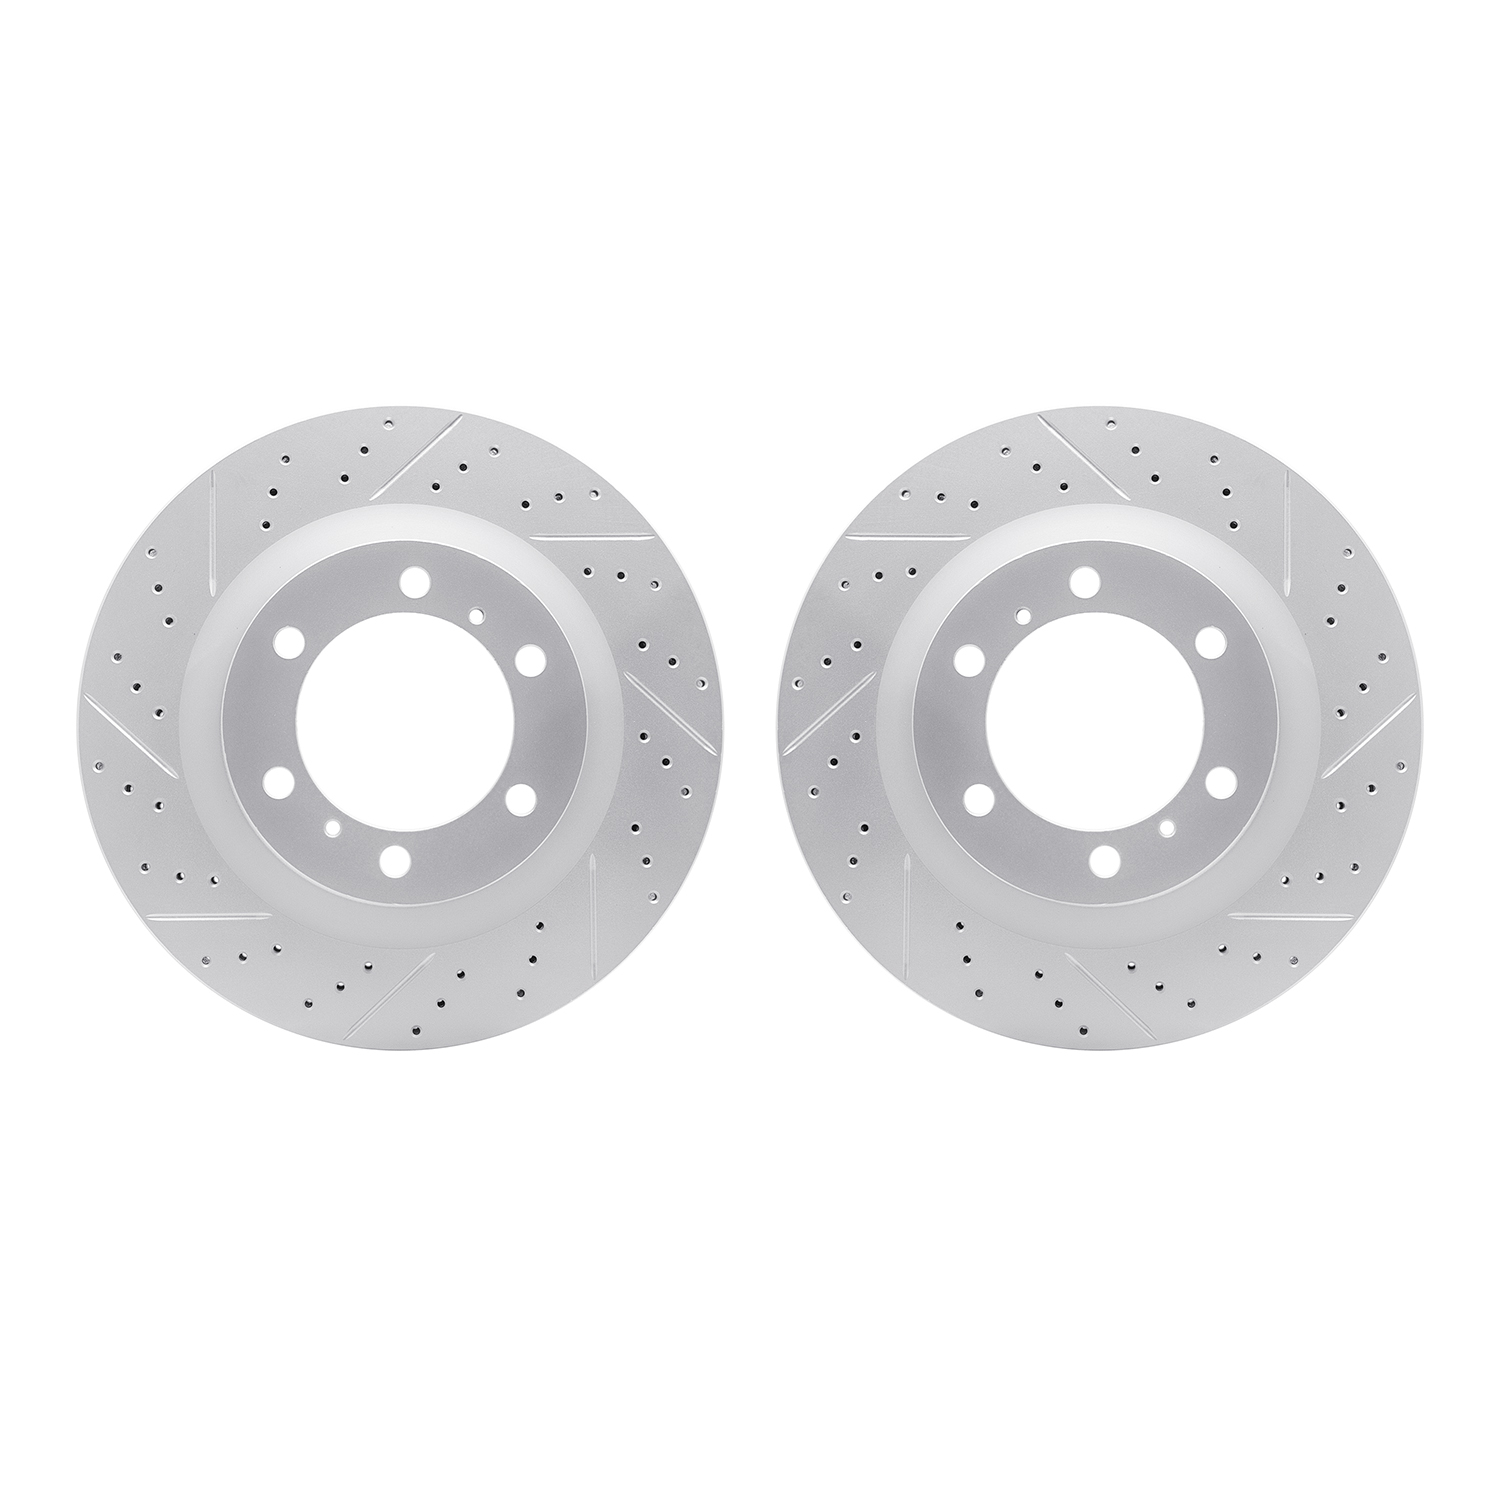 2002-76007 Geoperformance Drilled/Slotted Brake Rotors, Fits Select Lexus/Toyota/Scion, Position: Front